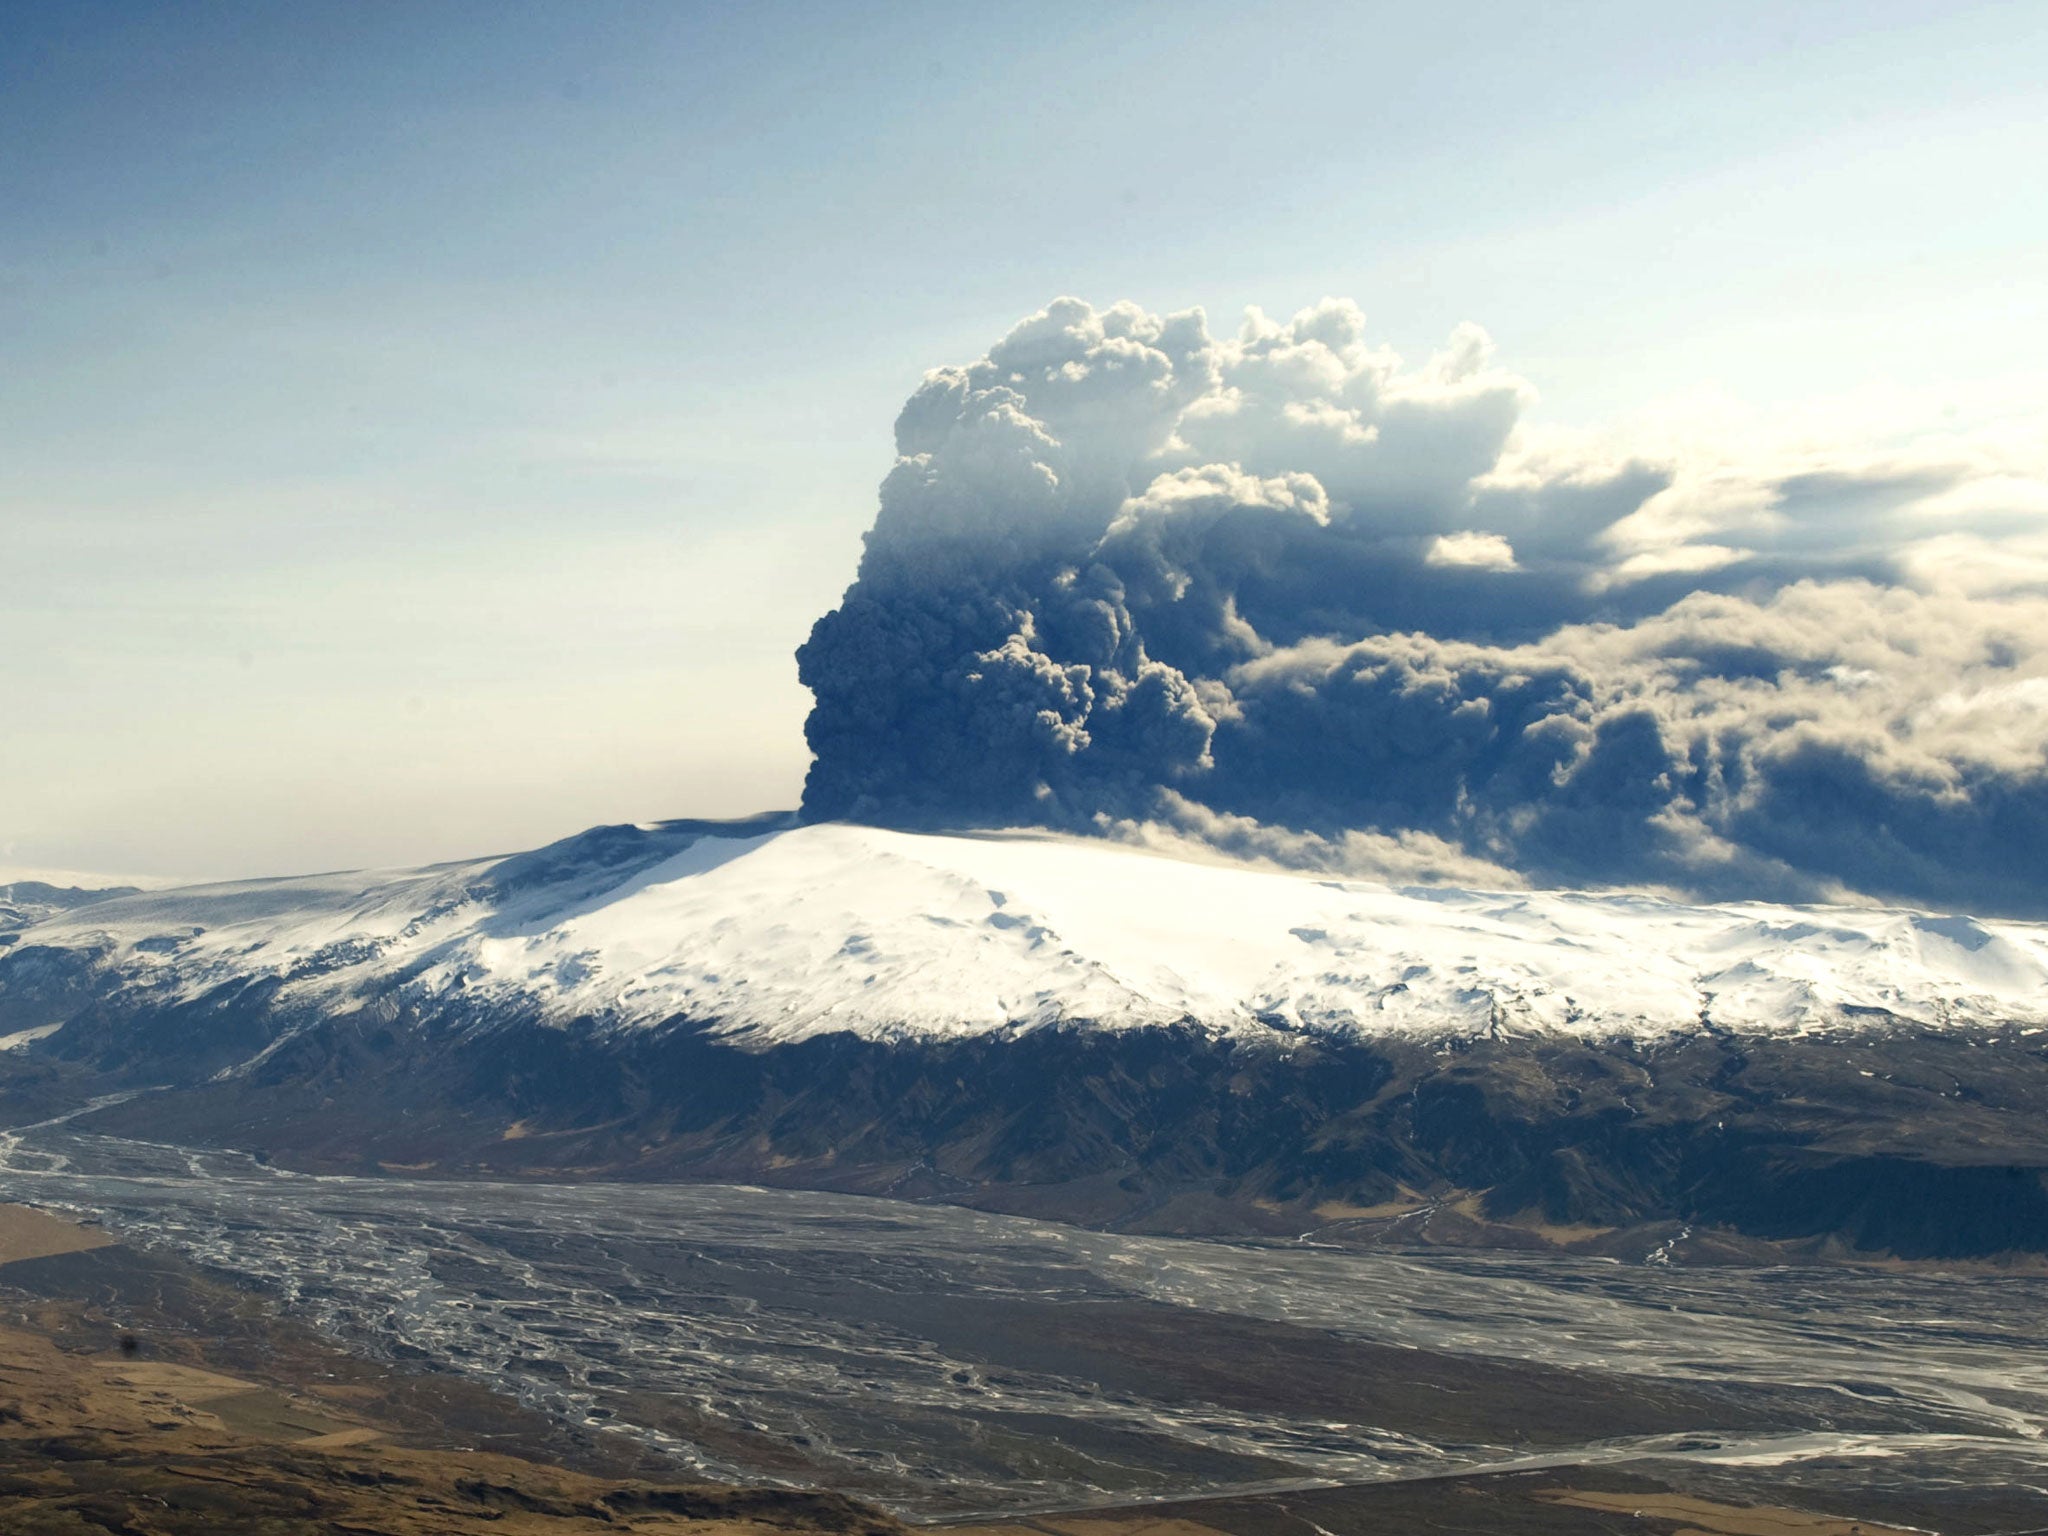 Iceland's Eyjafjallajokull volcano billowing smoke and ash in April 2010 - but by then Iceland's financial storm had already hit